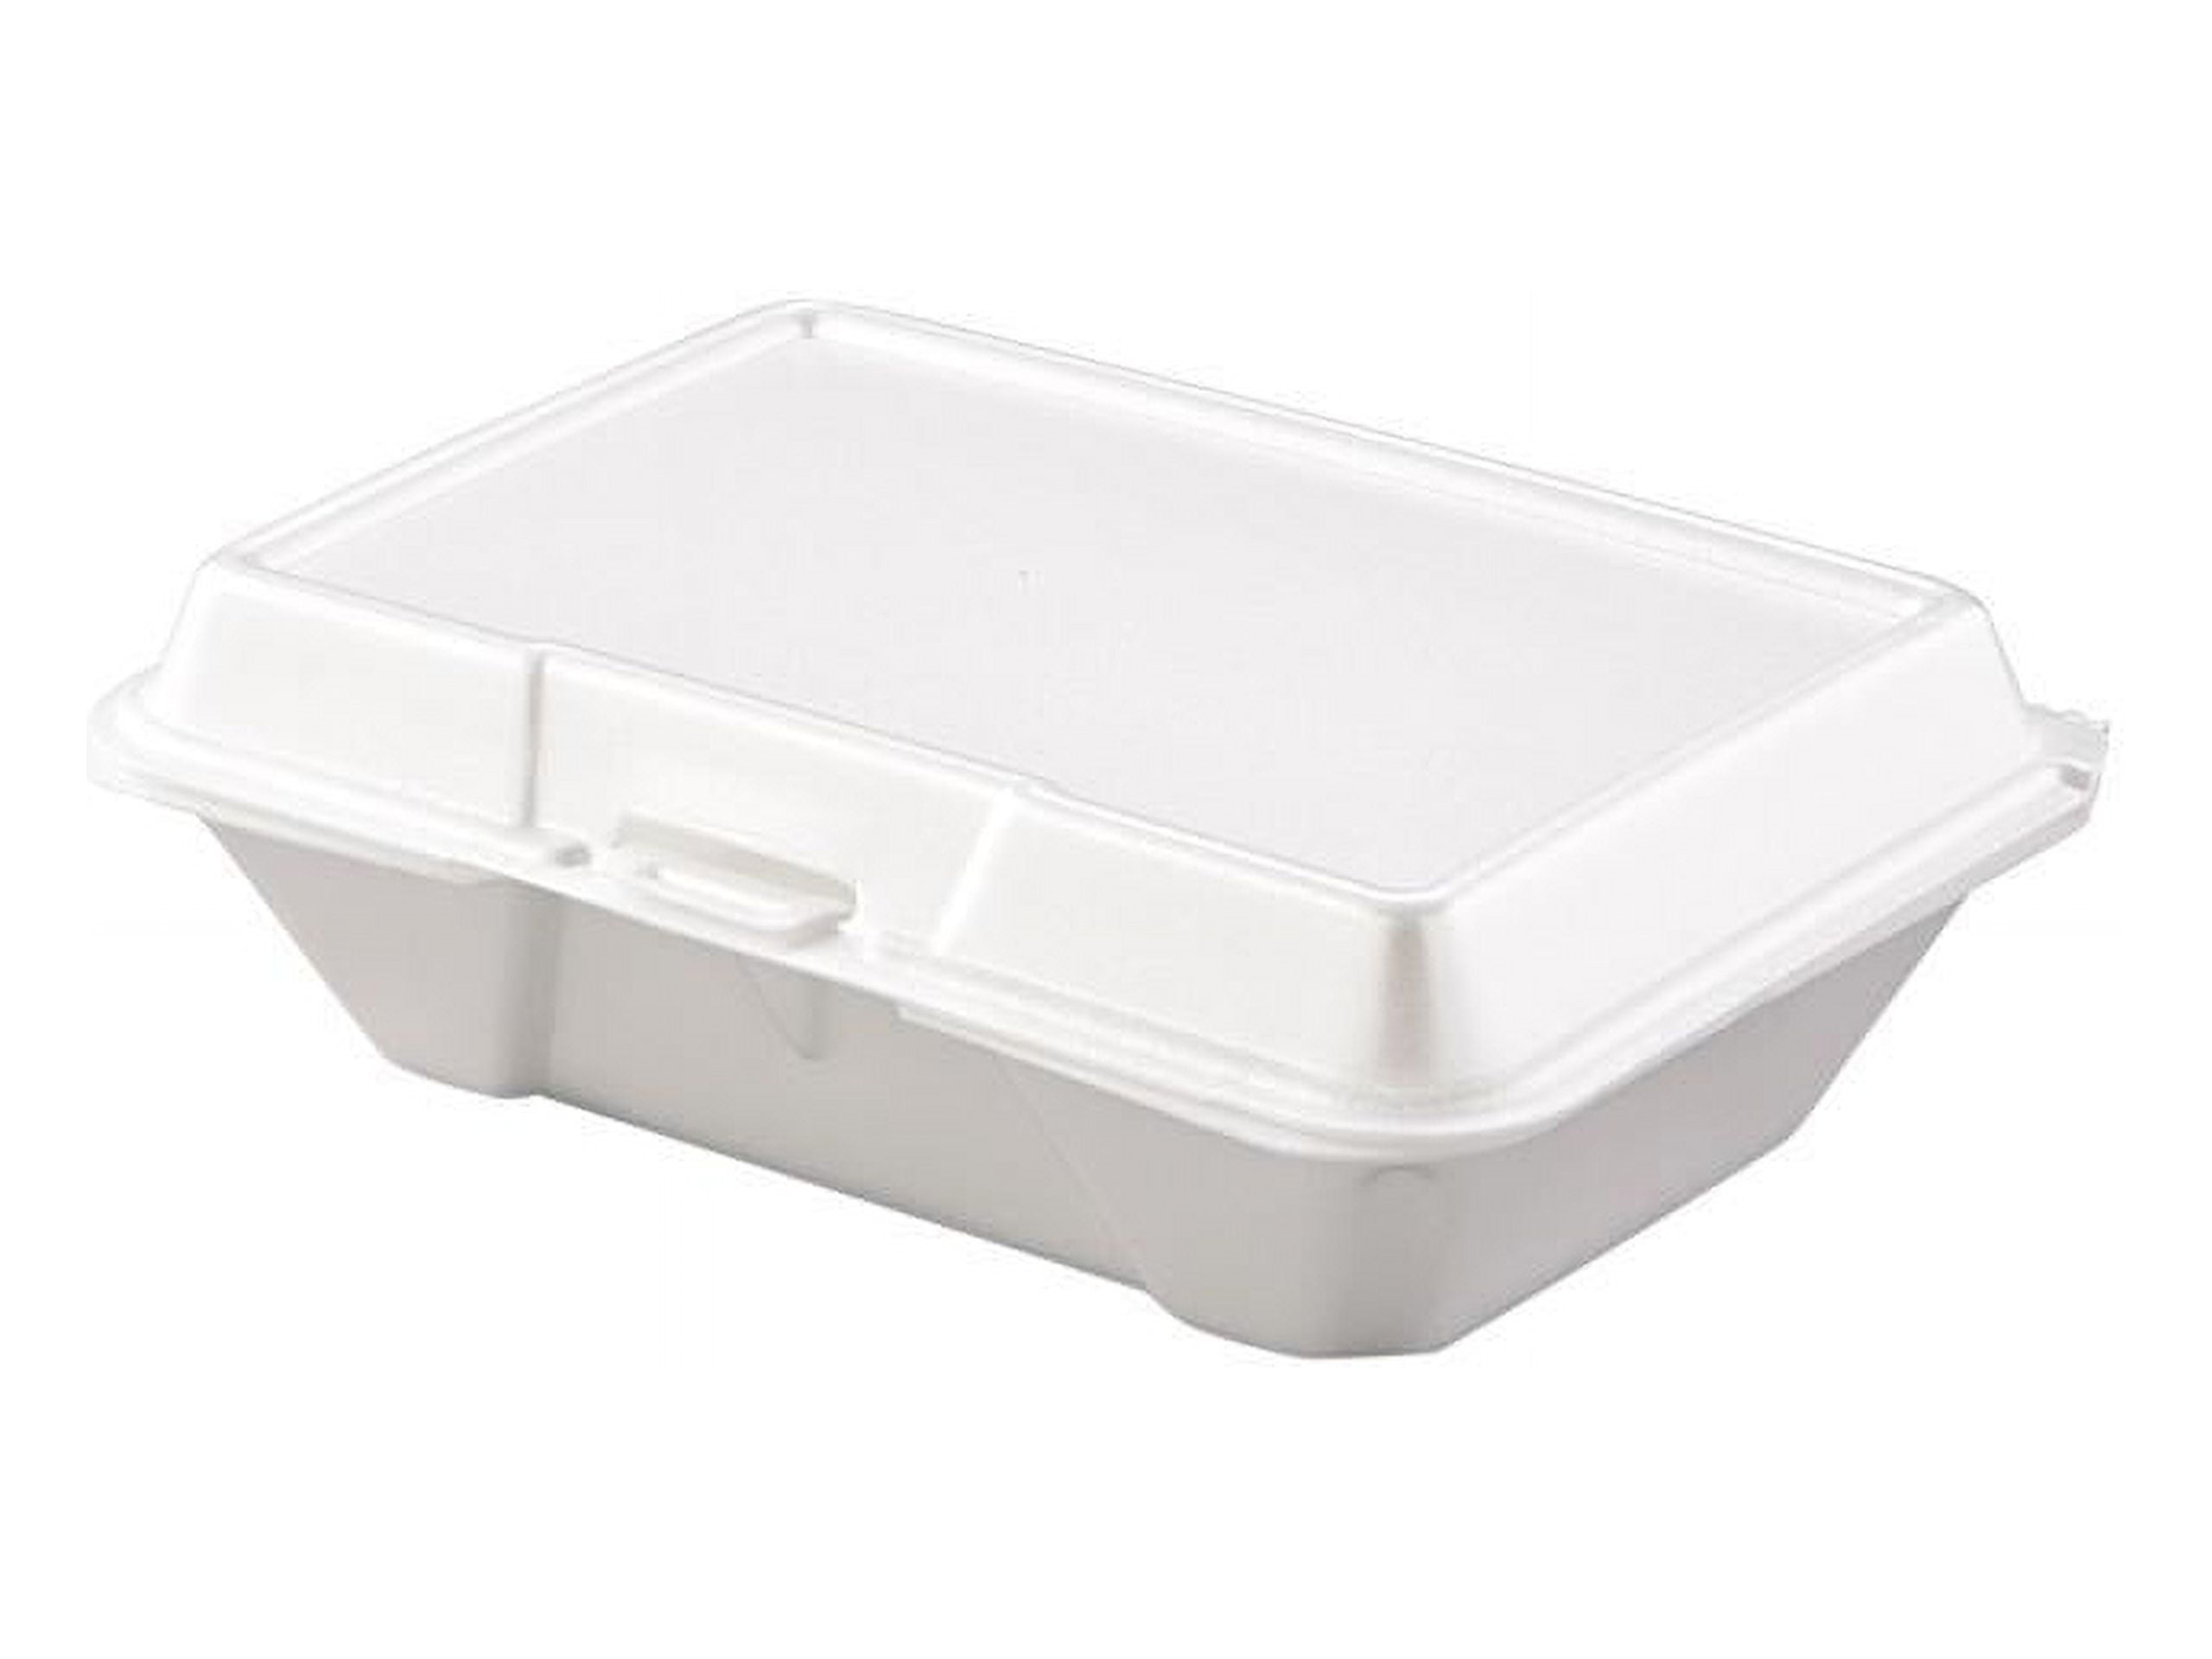 150 pcs Disposable Clamshell Food Take Out Container Box To Go 9.25 x 6.5 x  2.25